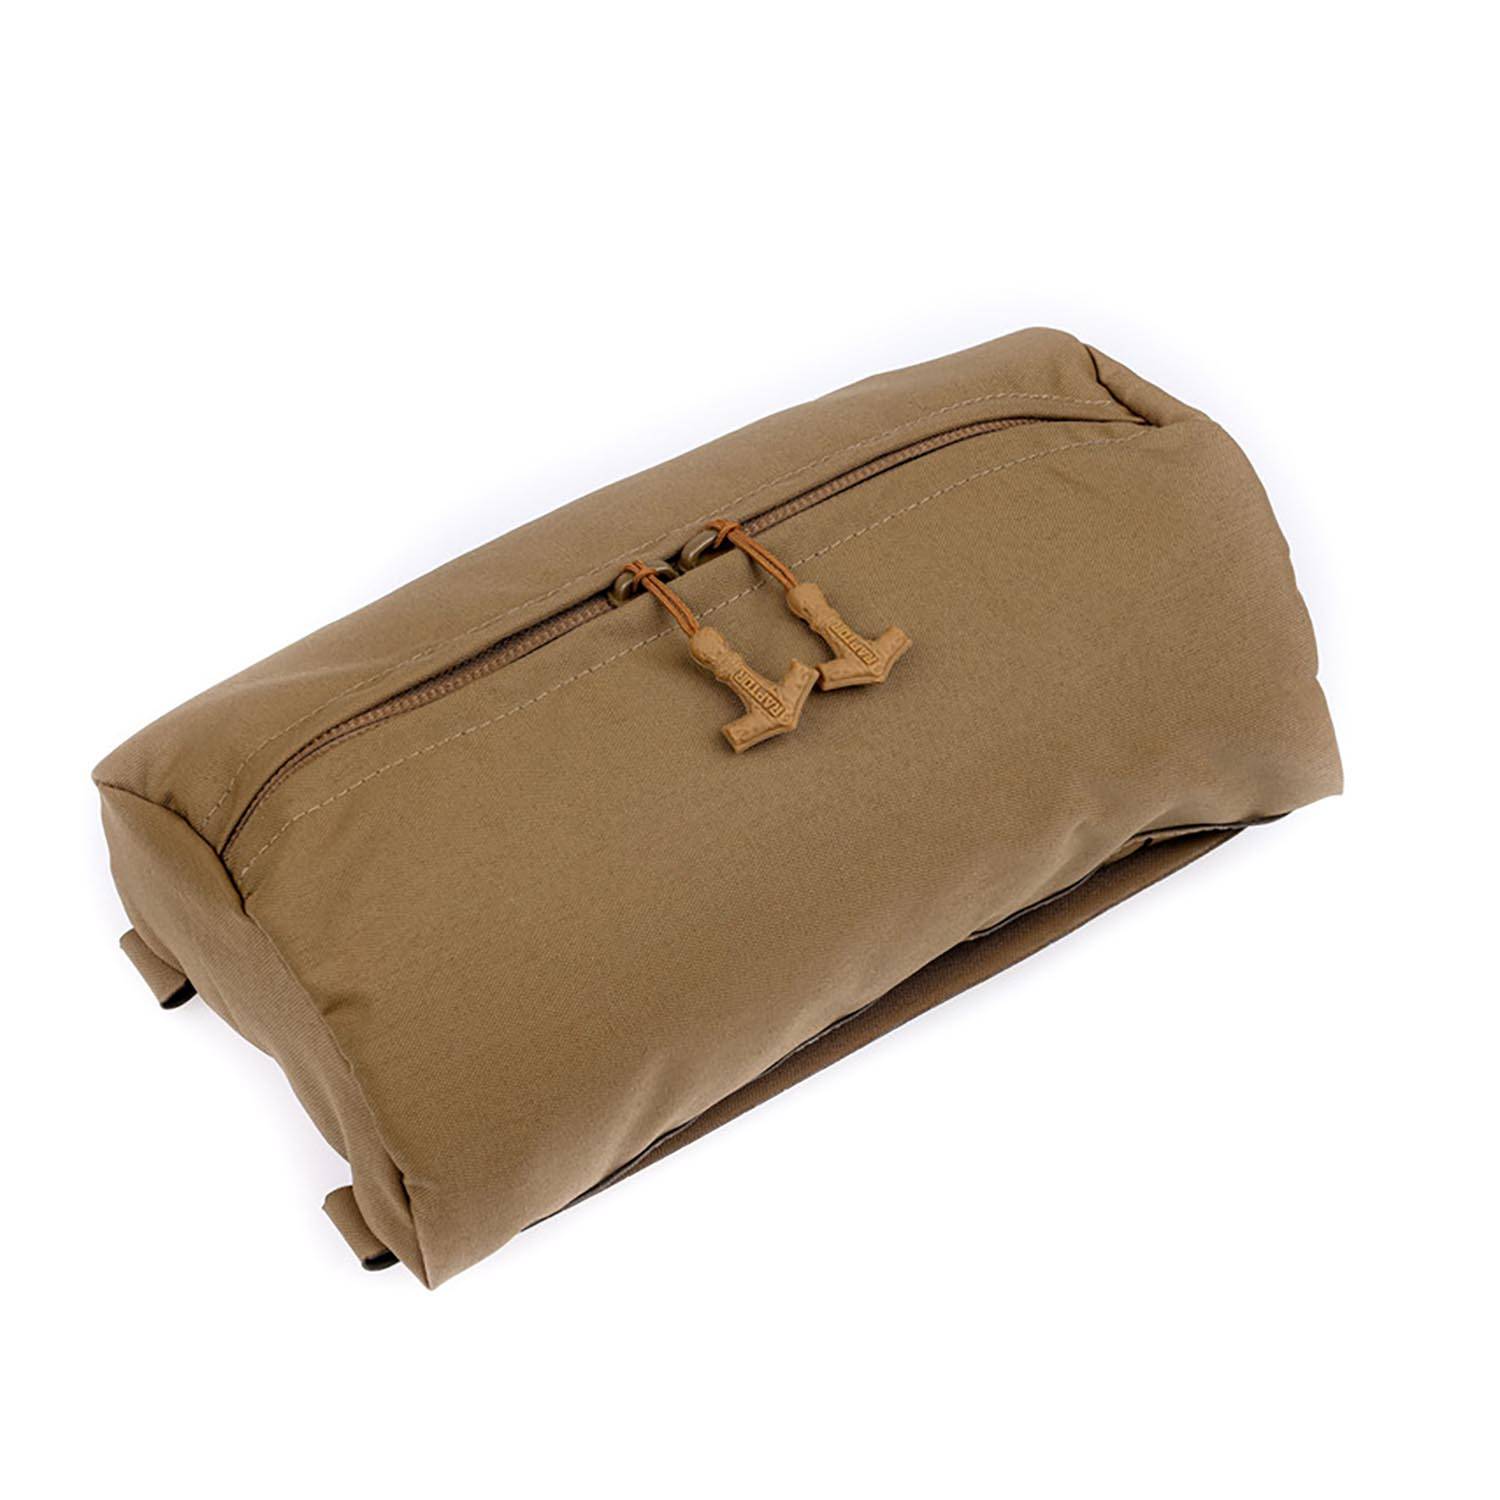 RAPTOR TACTICAL RANGER LARGE SUSTAINMENT POUCH